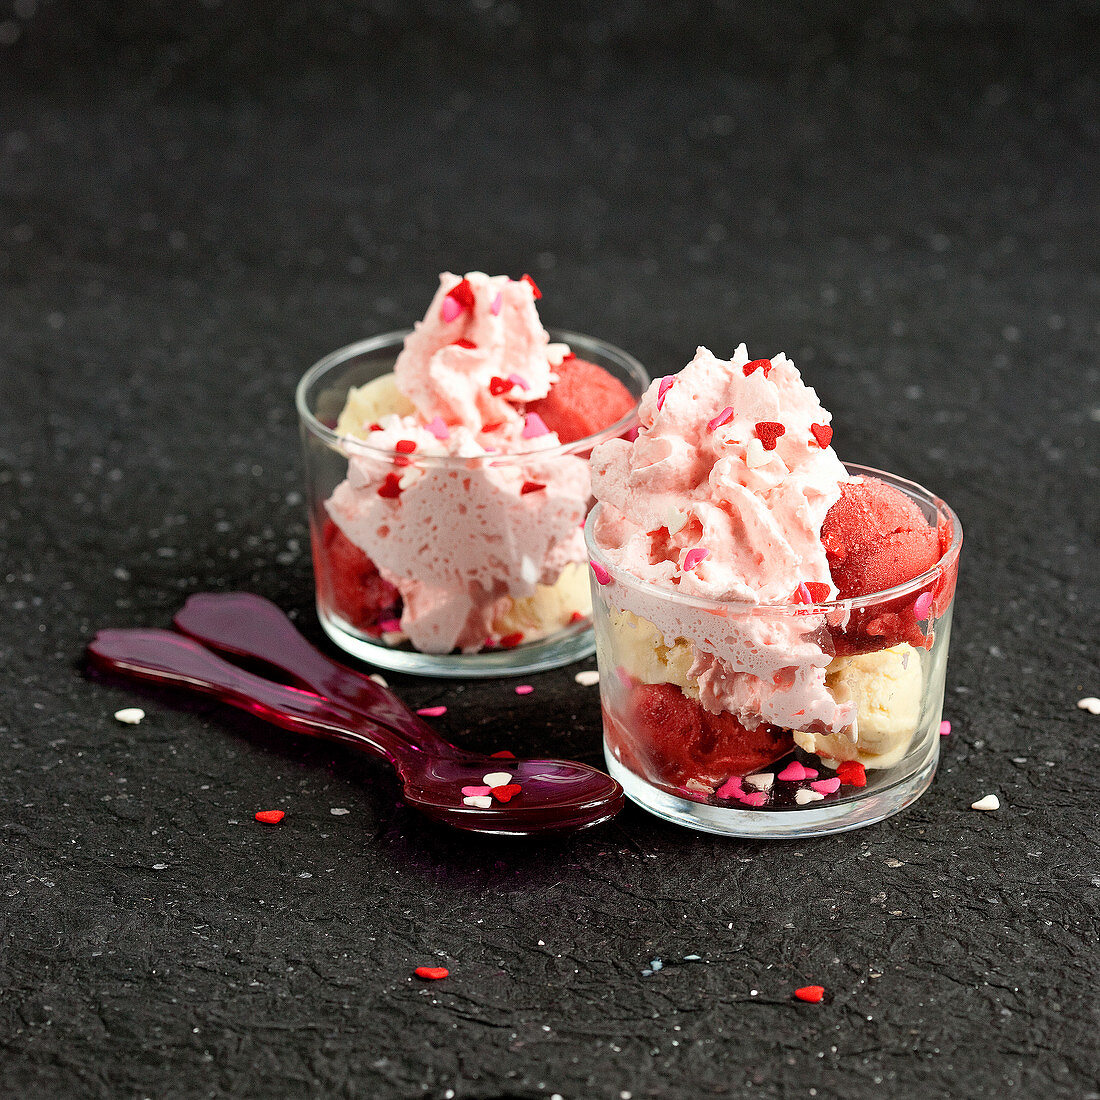 Glasses of ice cream with strawberry Tagada whipped cream